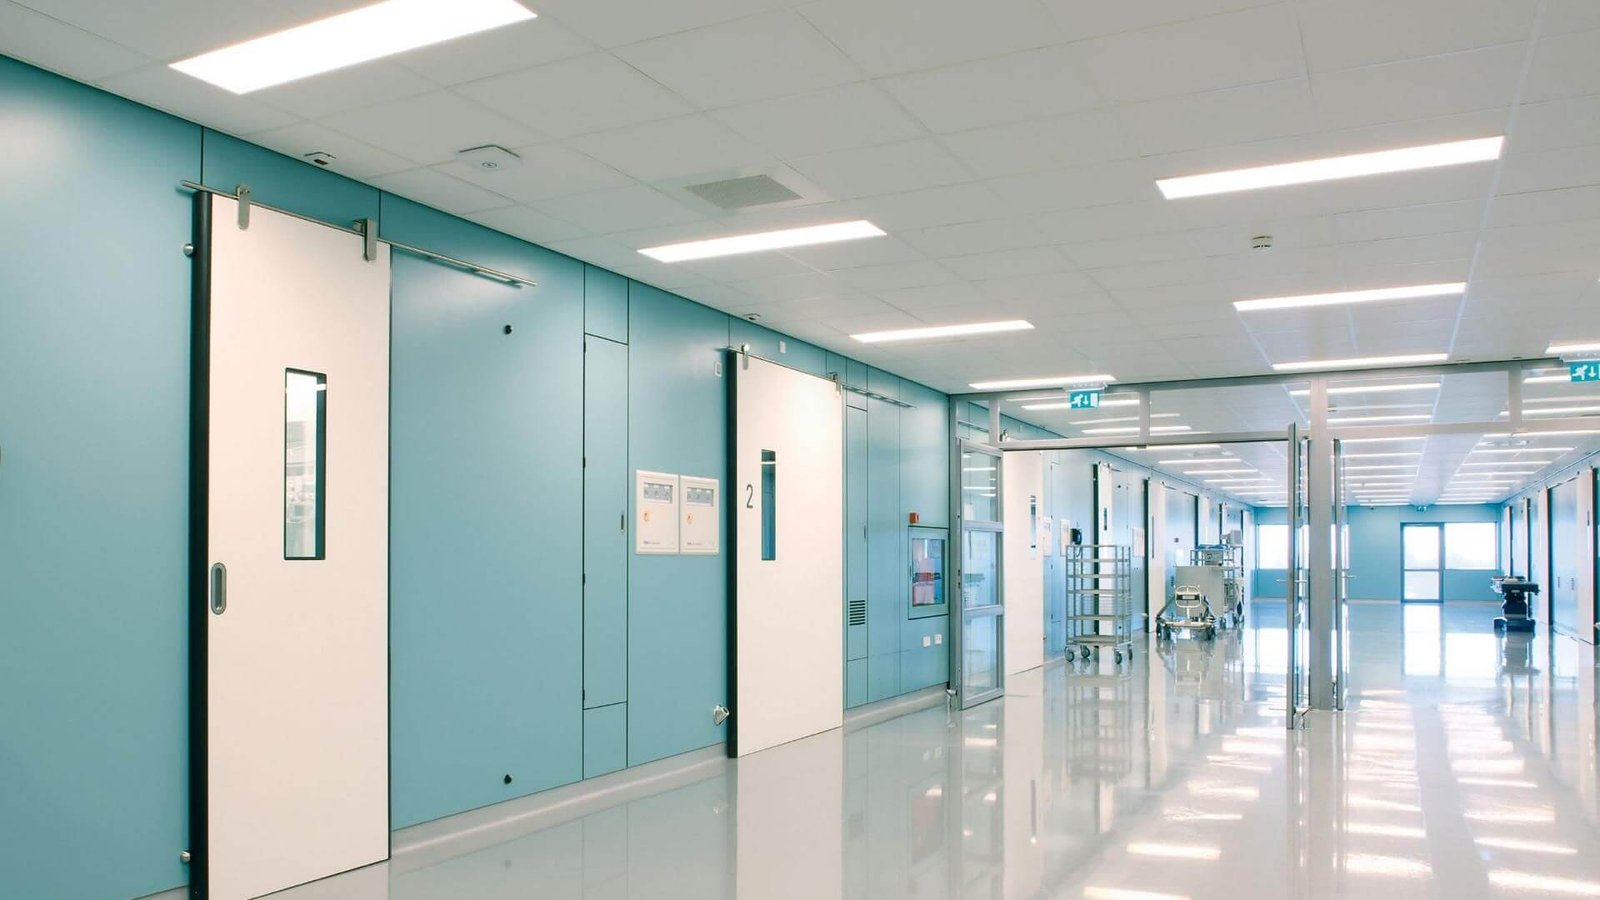 Factors to consider when upgrading hospital lighting systems